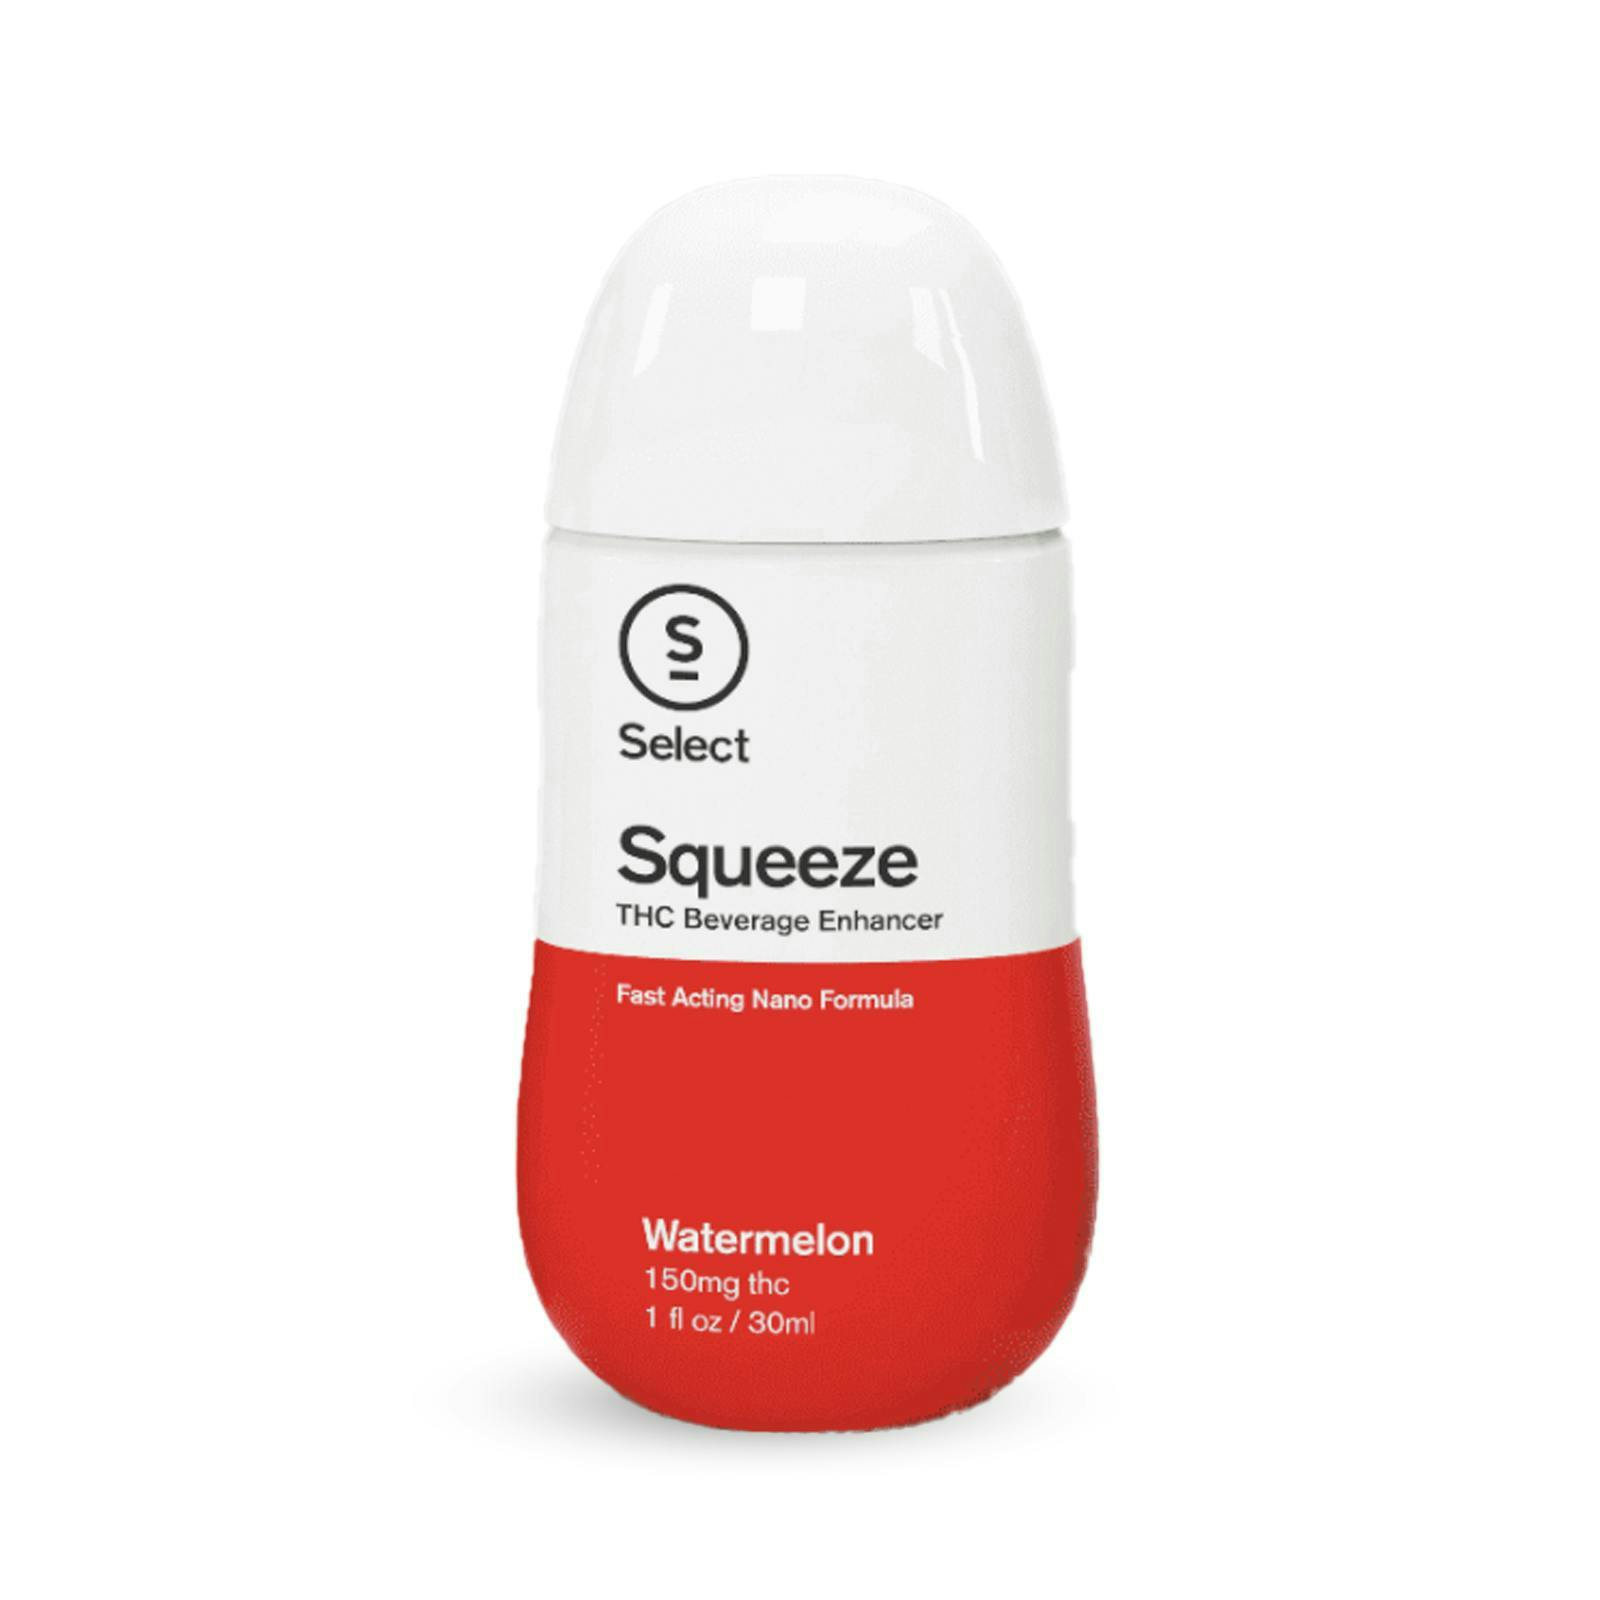 Watermelon Squeeze 30ml 150mg